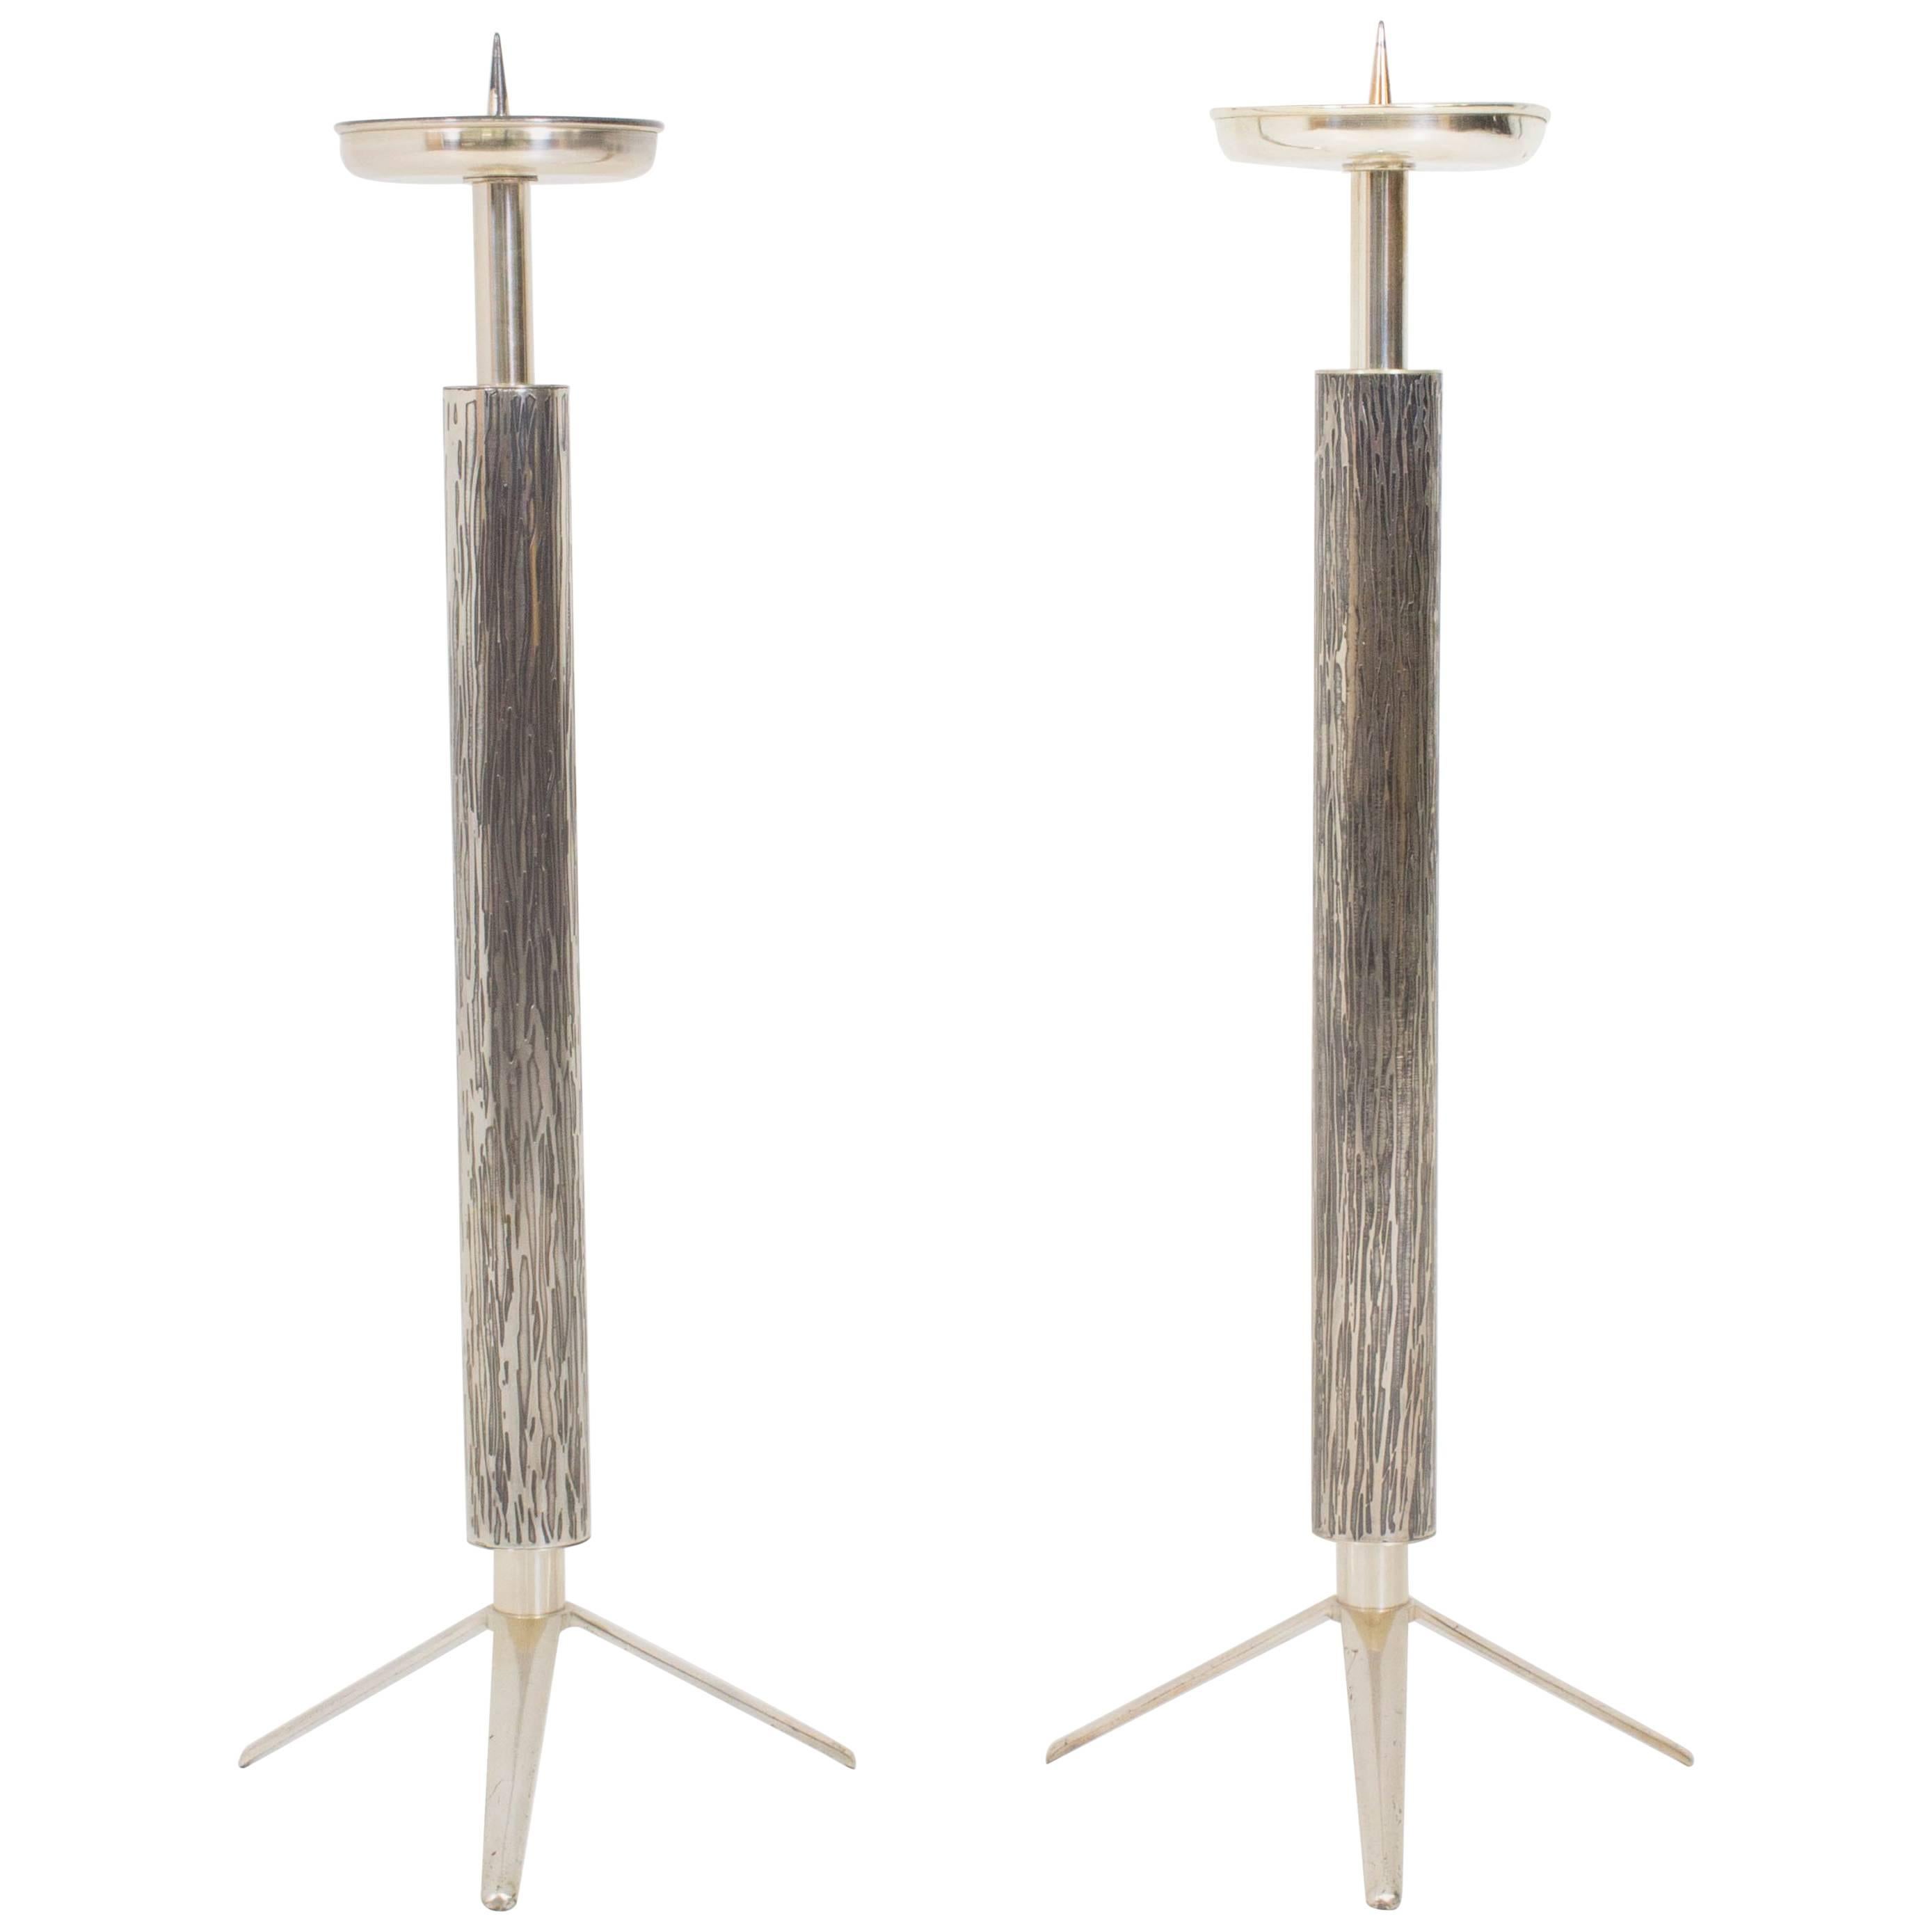 Fabulous Pair of French, Mid-Century Modern Candelabras or Candlesticks, 1970s